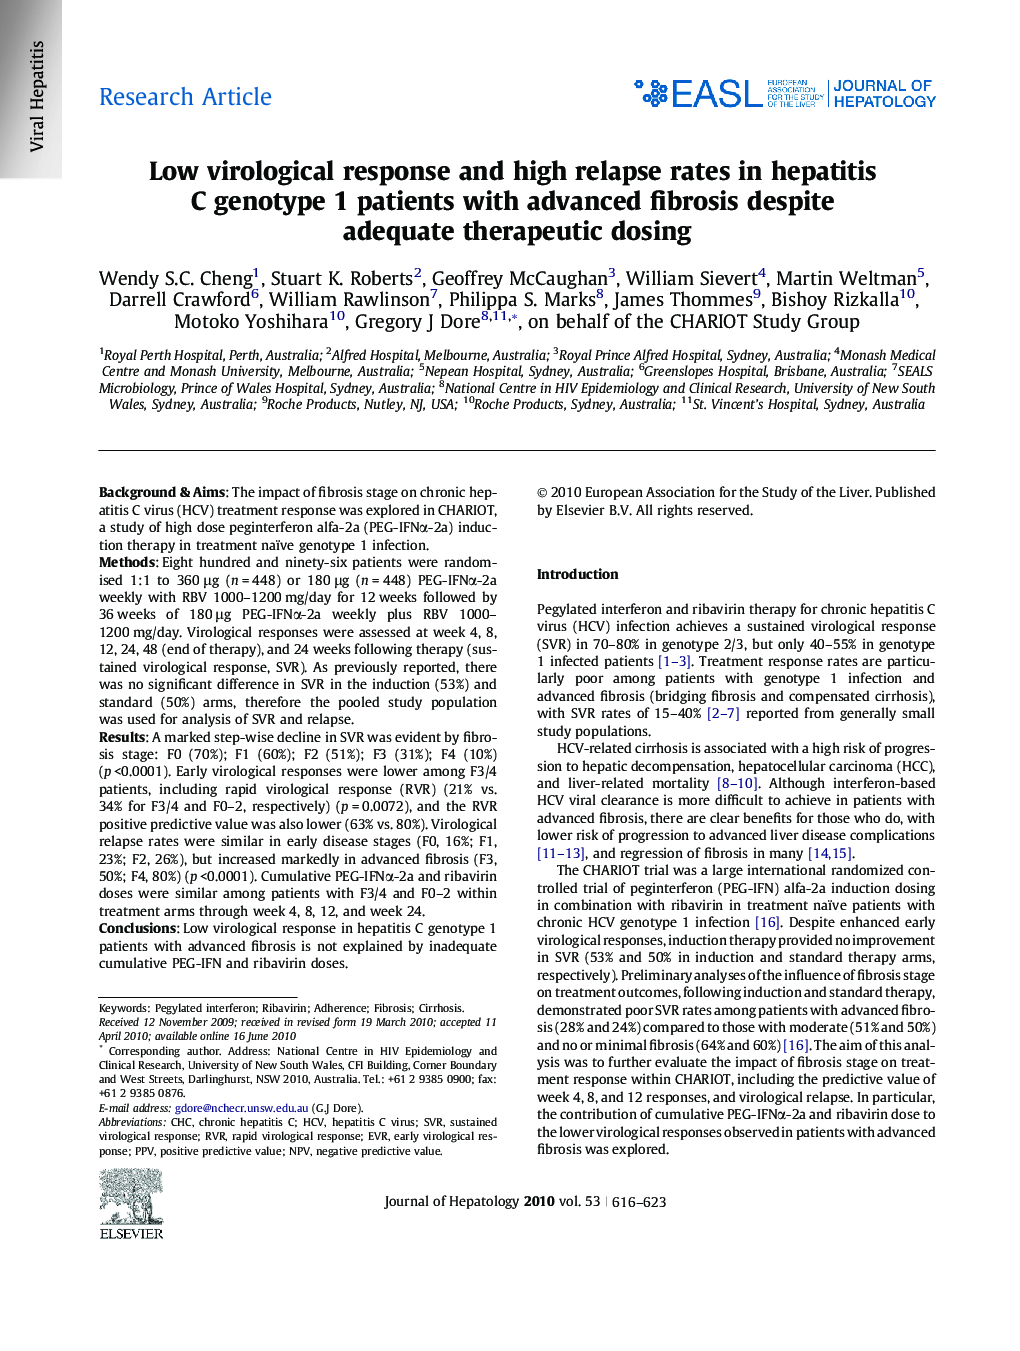 Research ArticleLow virological response and high relapse rates in hepatitis C genotype 1 patients with advanced fibrosis despite adequate therapeutic dosing